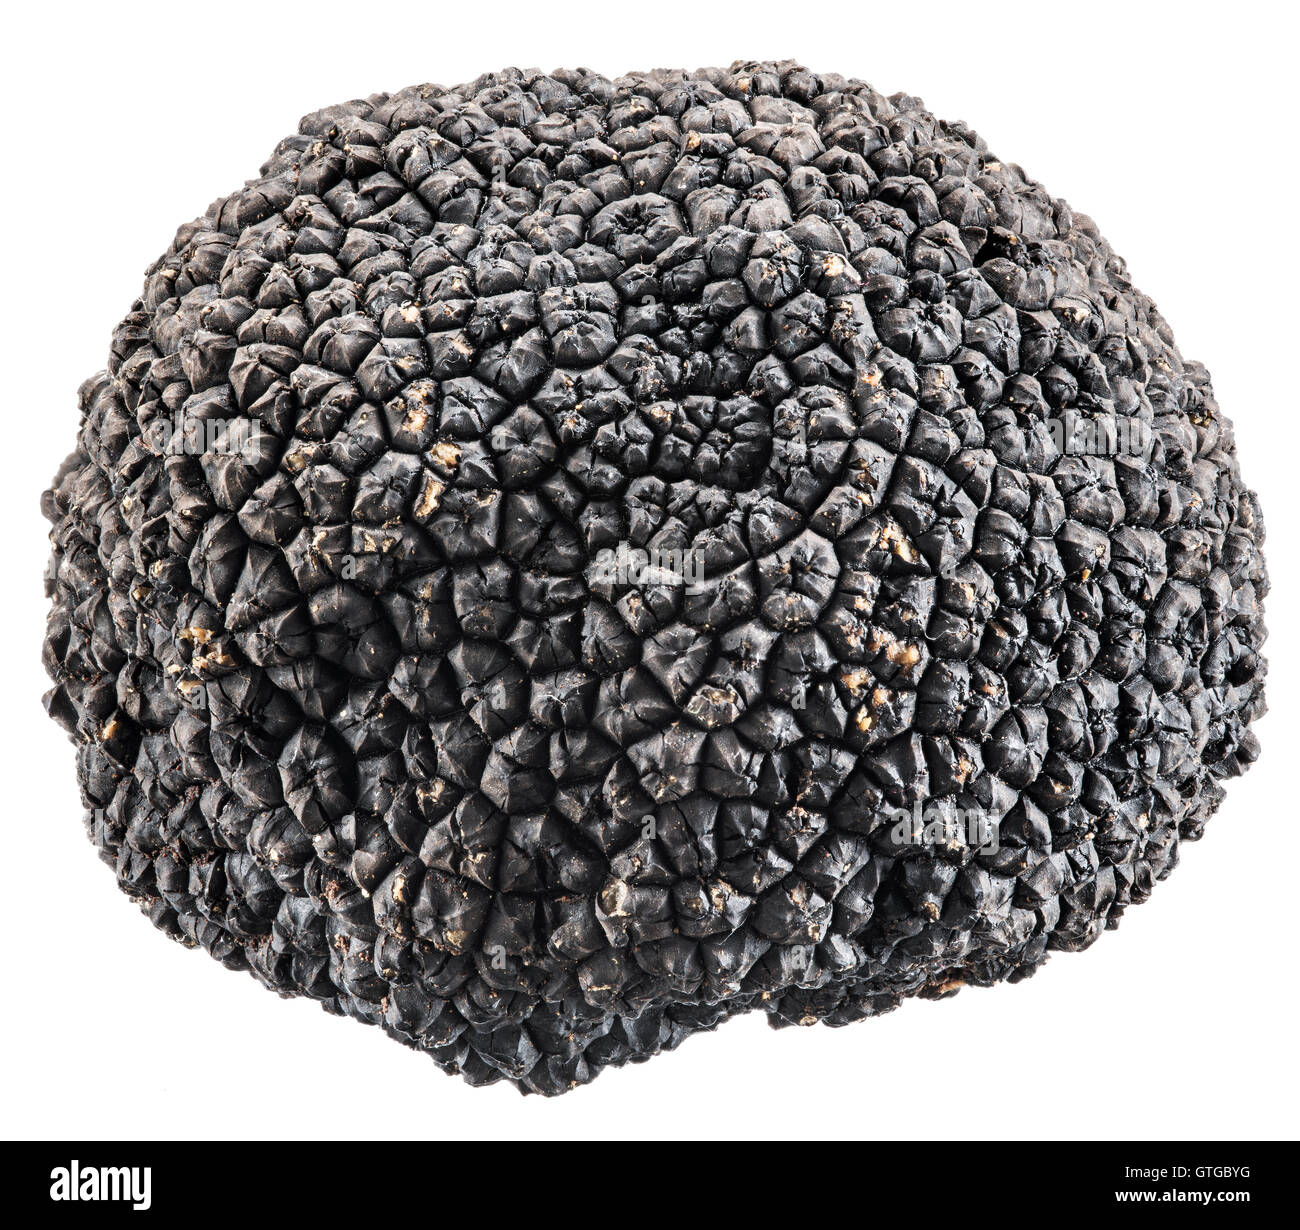 Black truffle. File contains clipping paths. Stock Photo